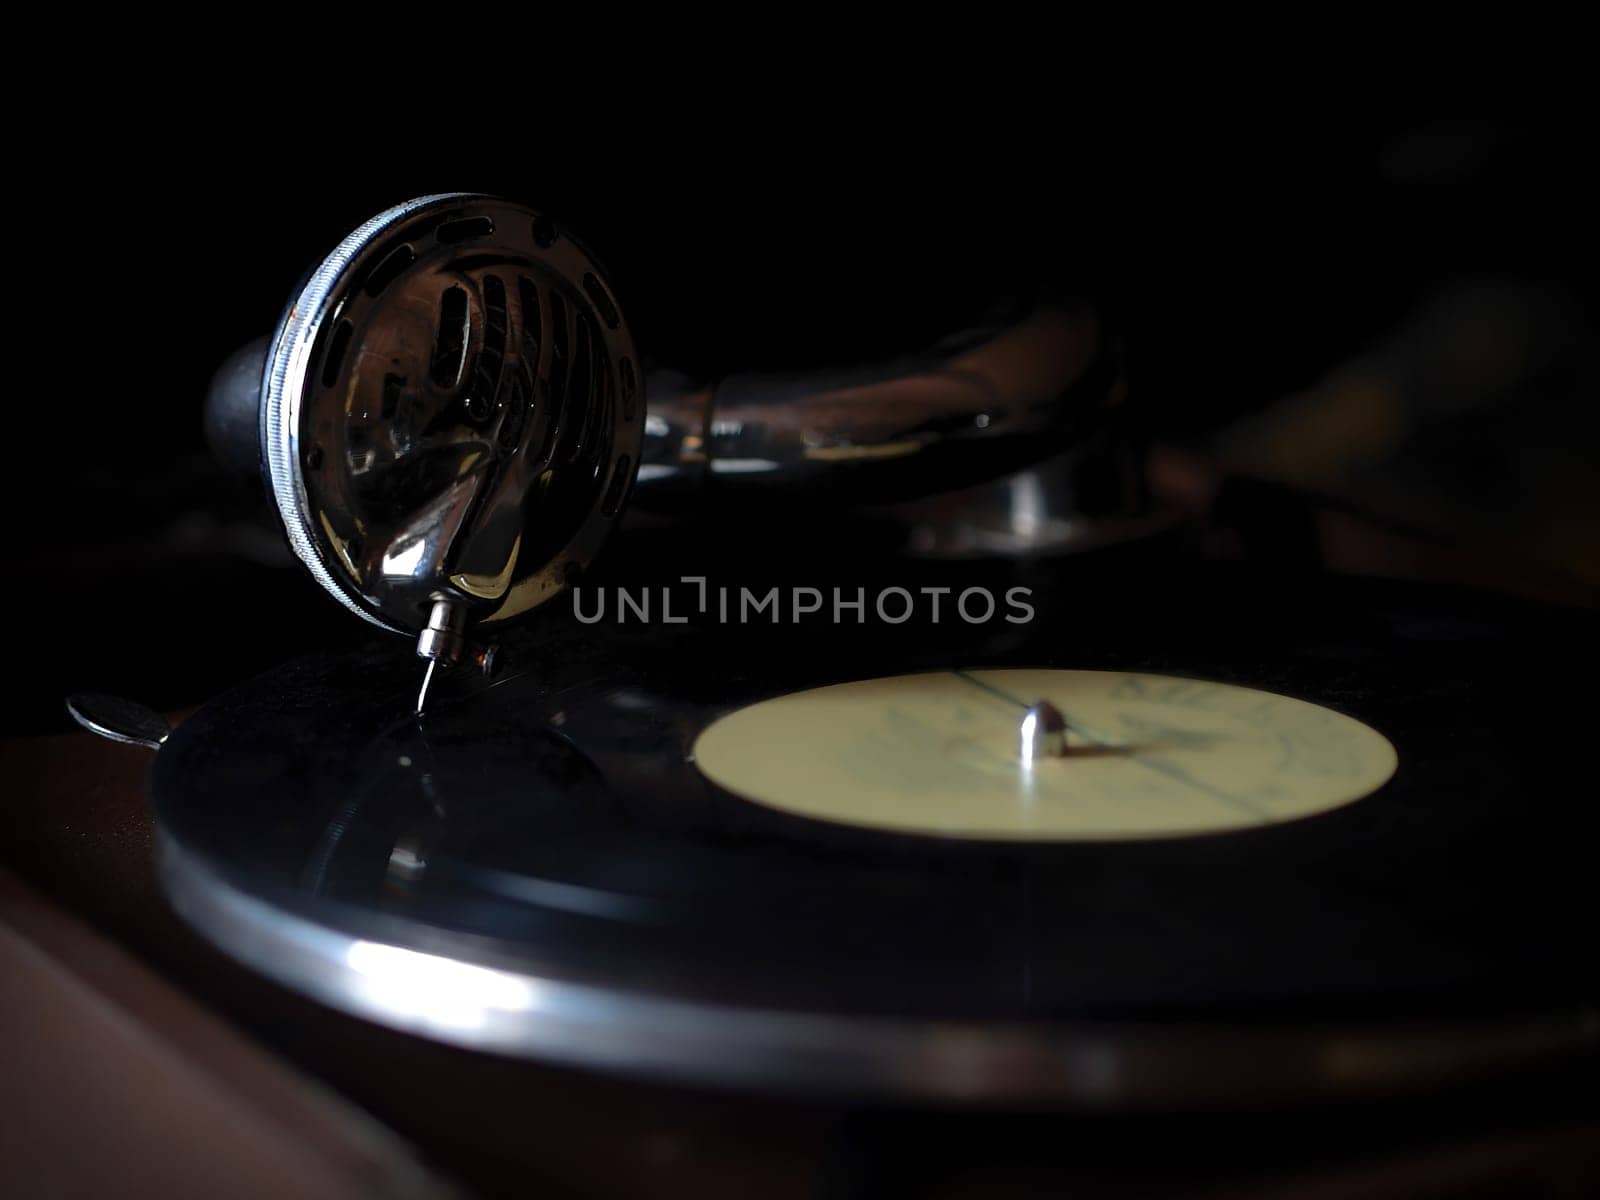 Vintage turntable vinyl record player close up by Andre1ns